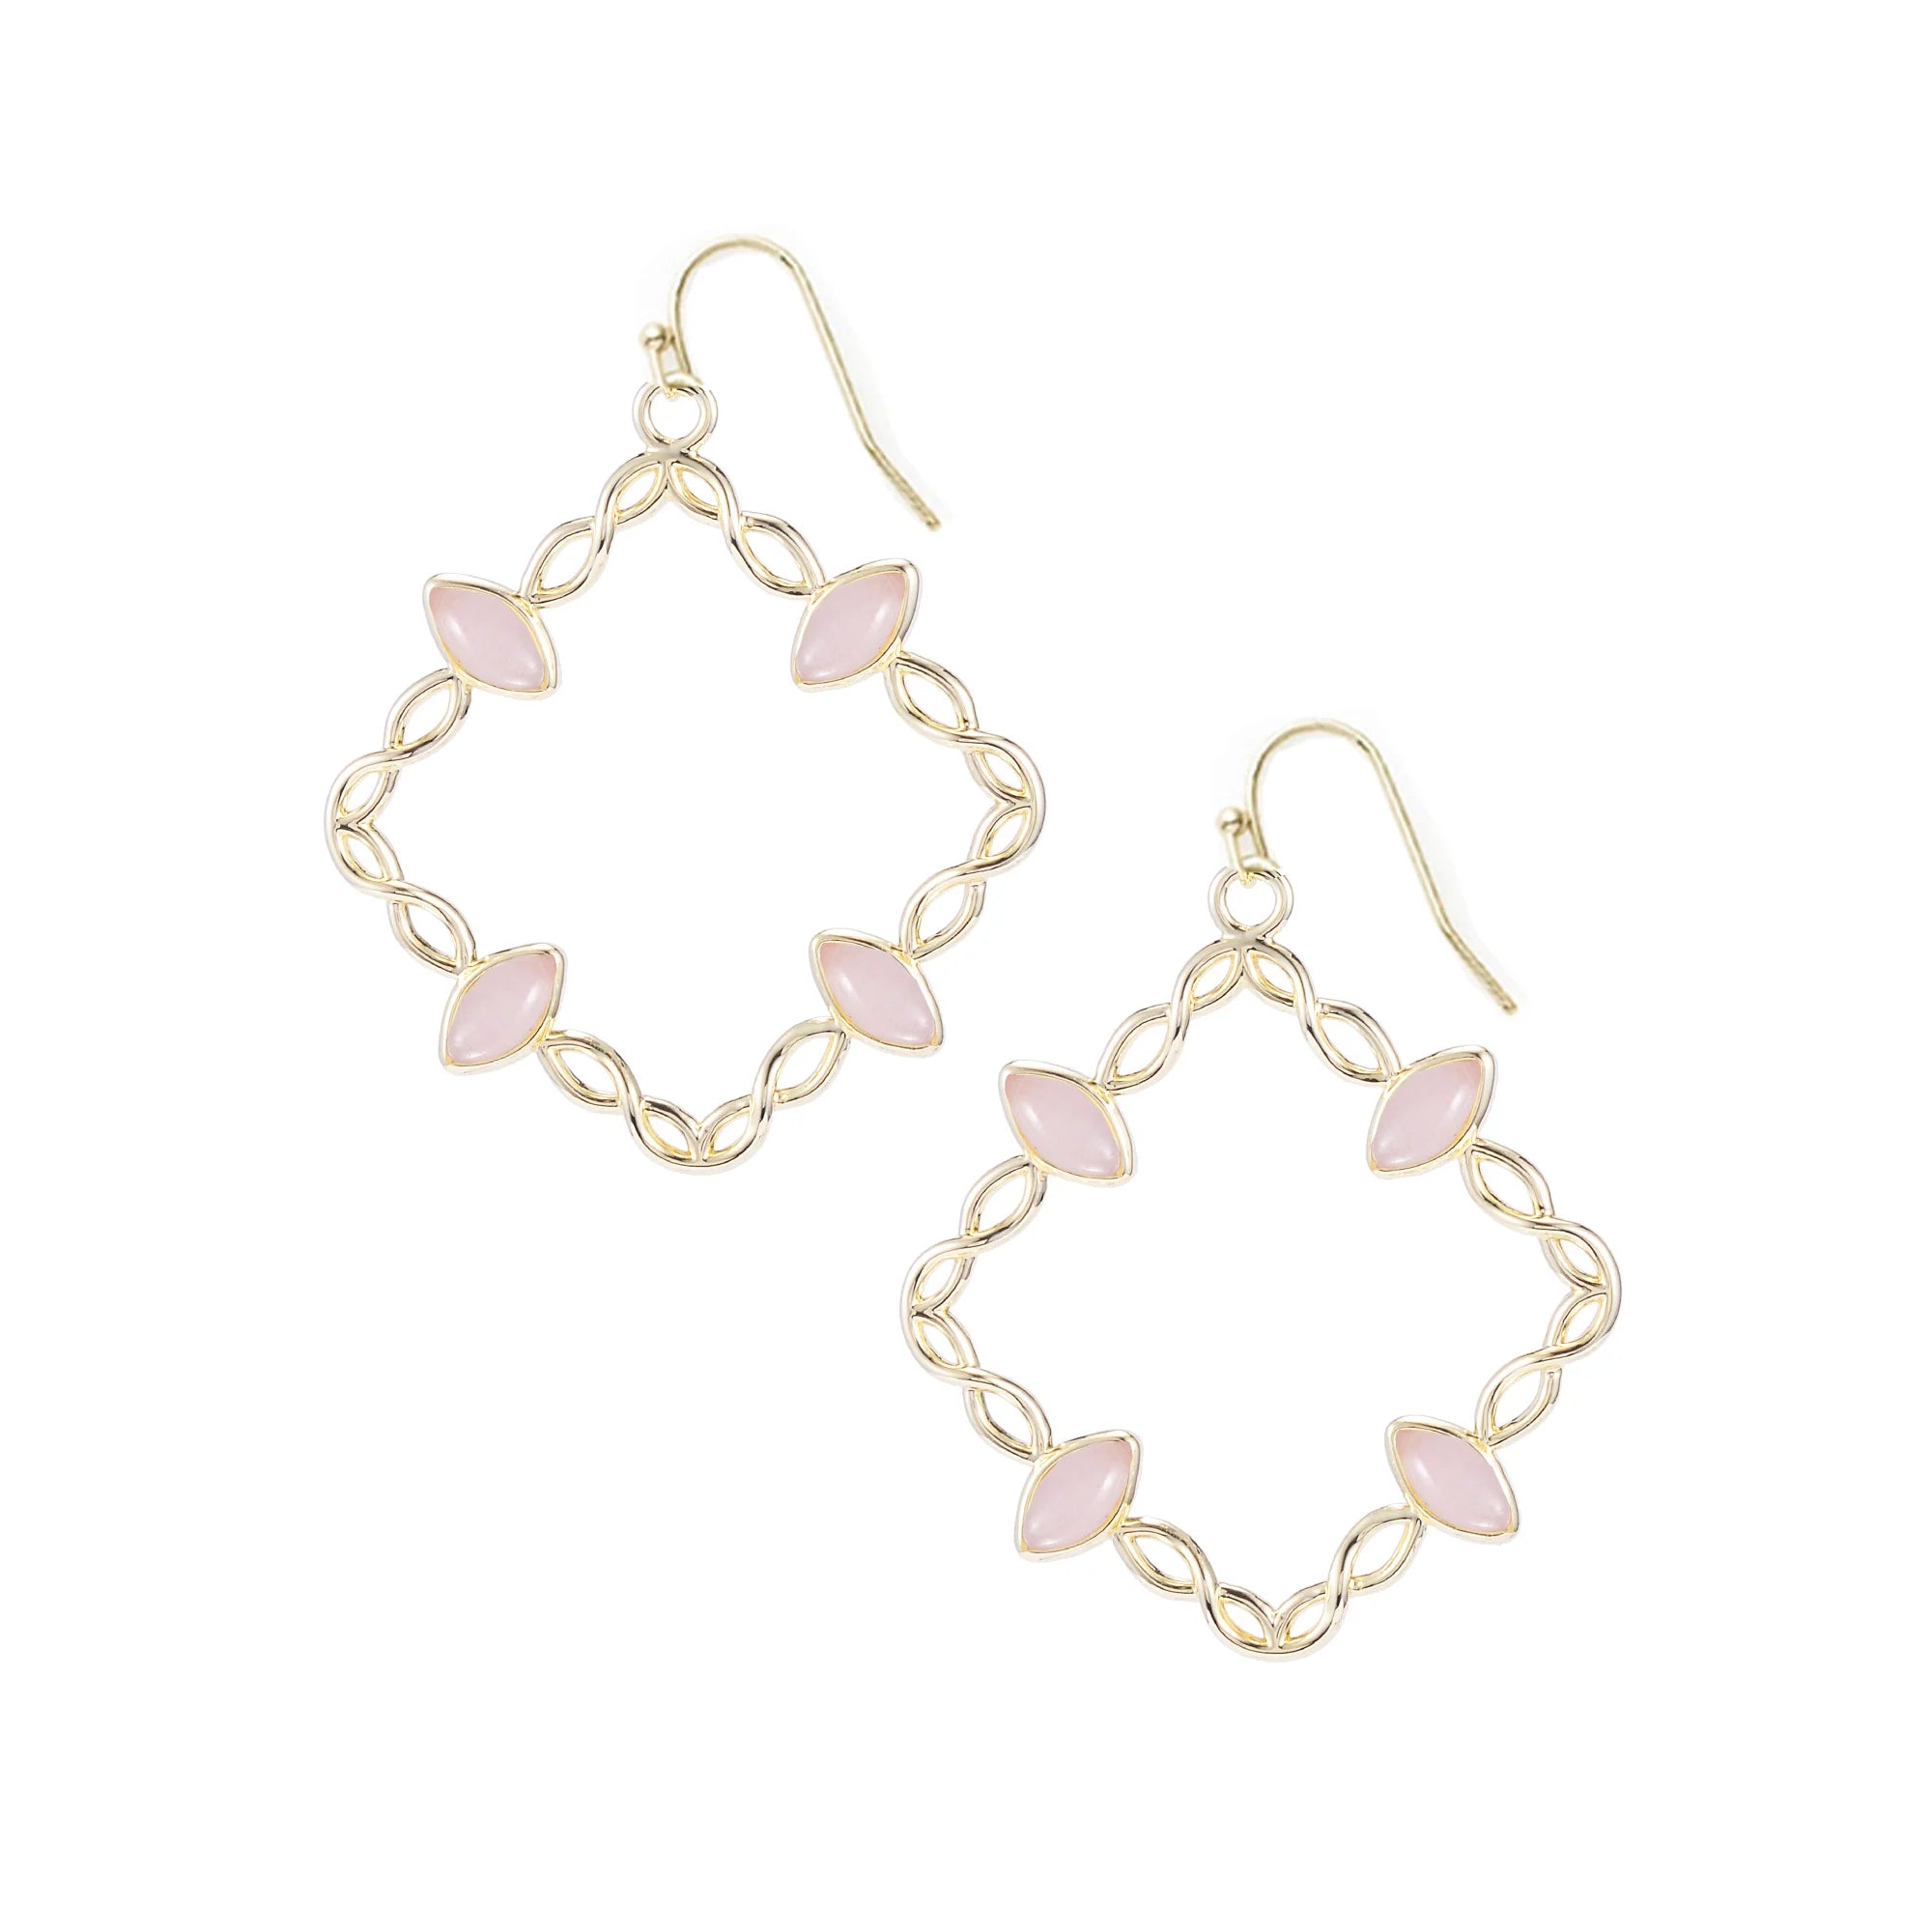 Natalie Wood - Blossom Statement Earrings Pink Cat's Eye-110 Jewelry & Hair-Natalie Wood-July & June Women's Fashion Boutique Located in San Antonio, Texas